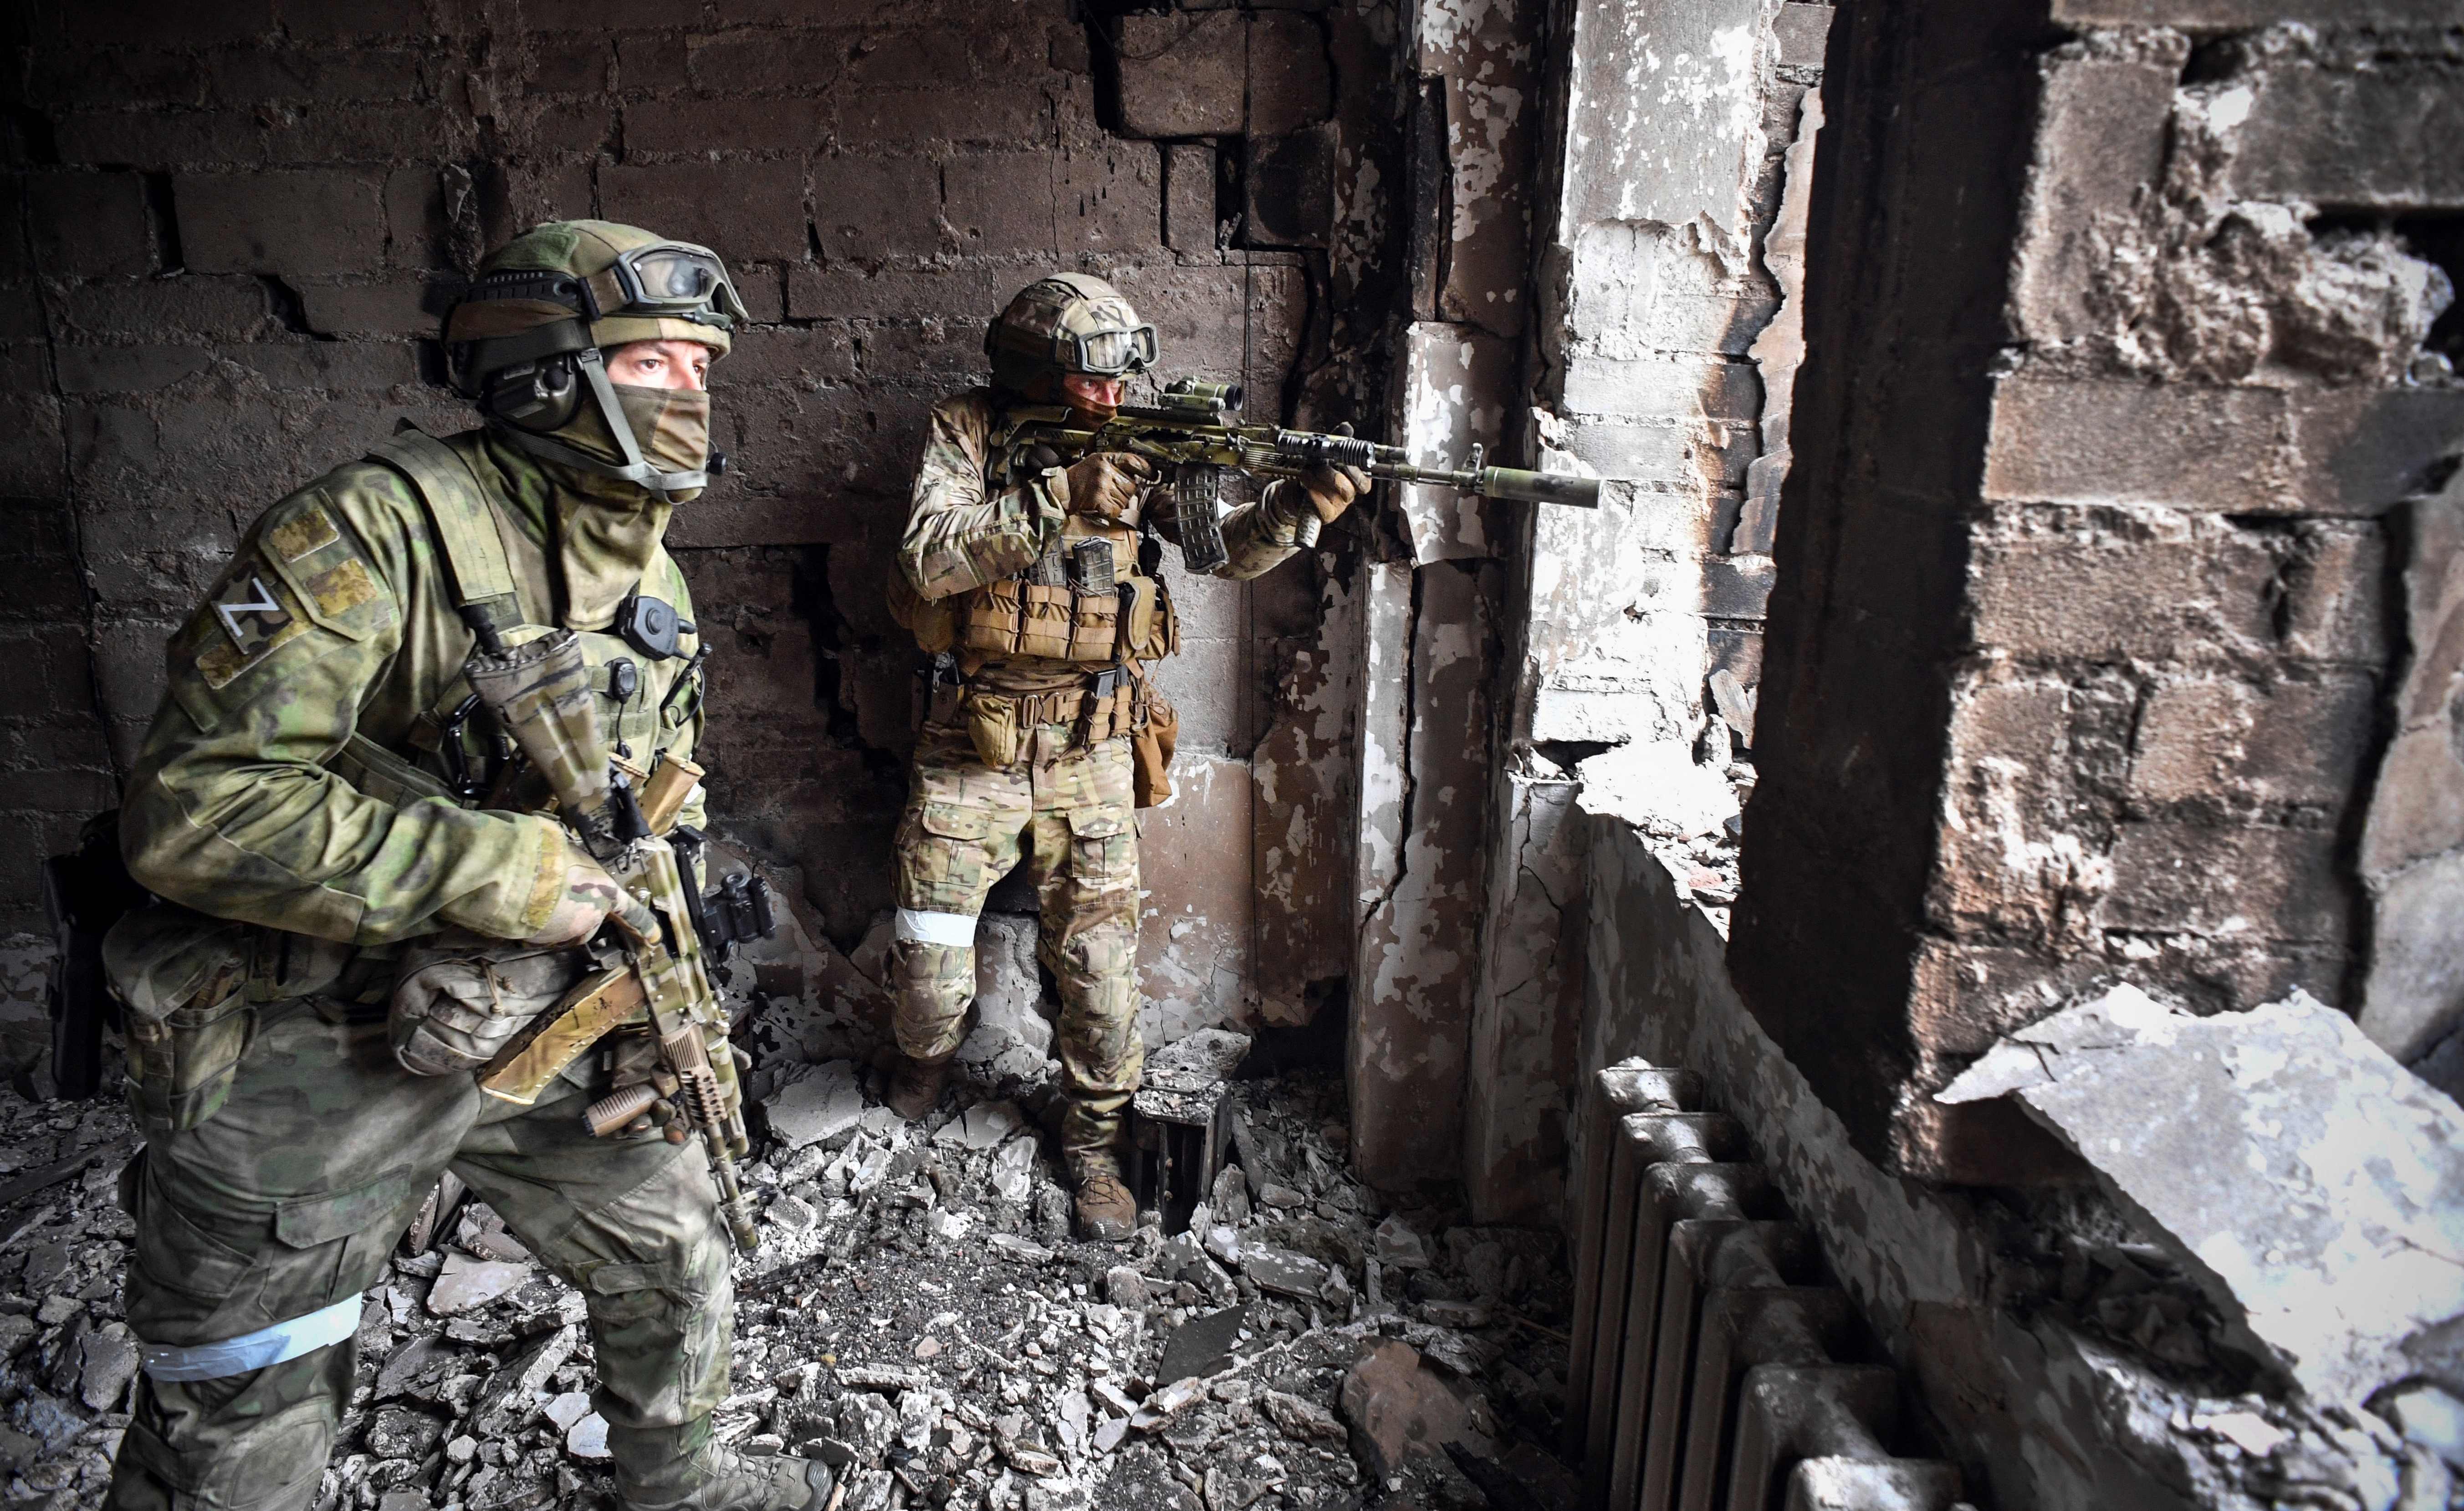 Russian soldiers on patrol at the Mariupol drama theatre, which was hit by an airstrike in March